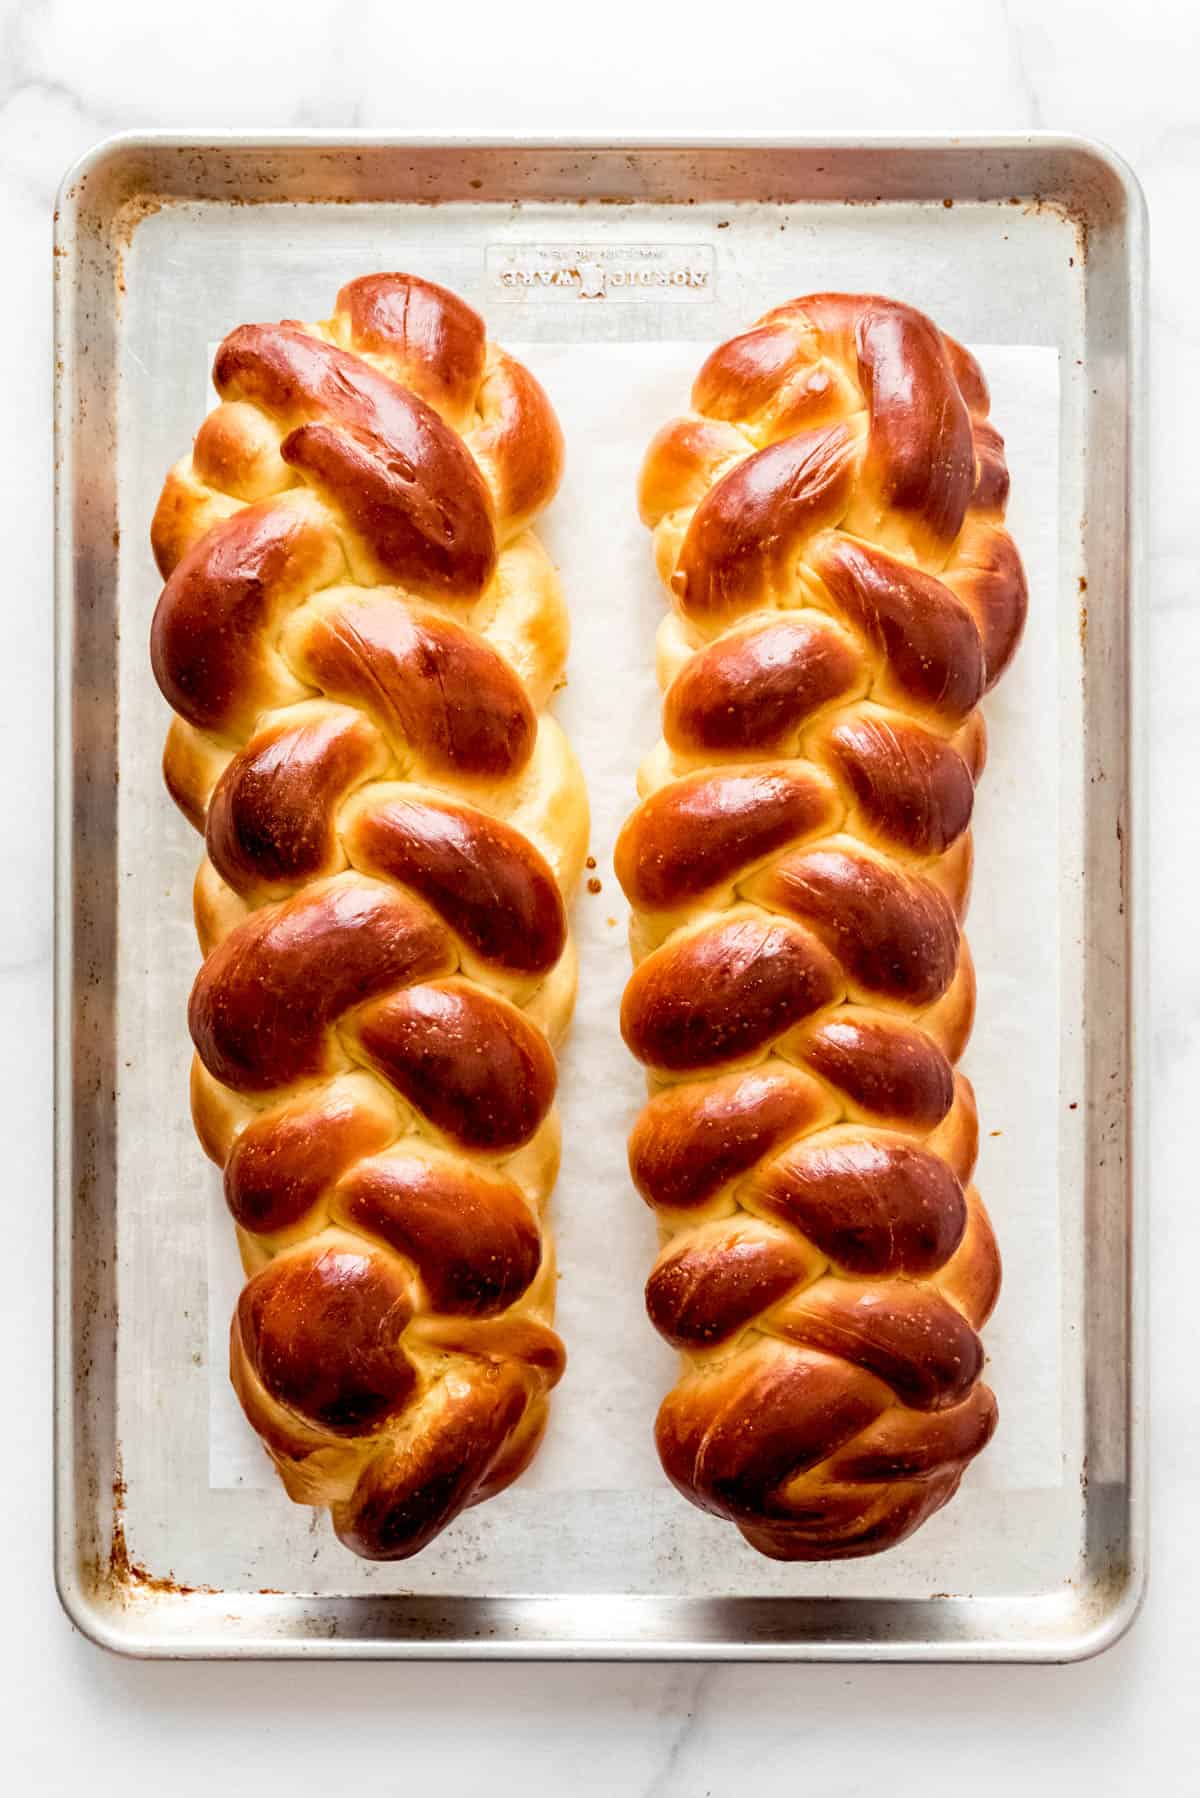 Two loaves of braided challah bread on a baking sheet.